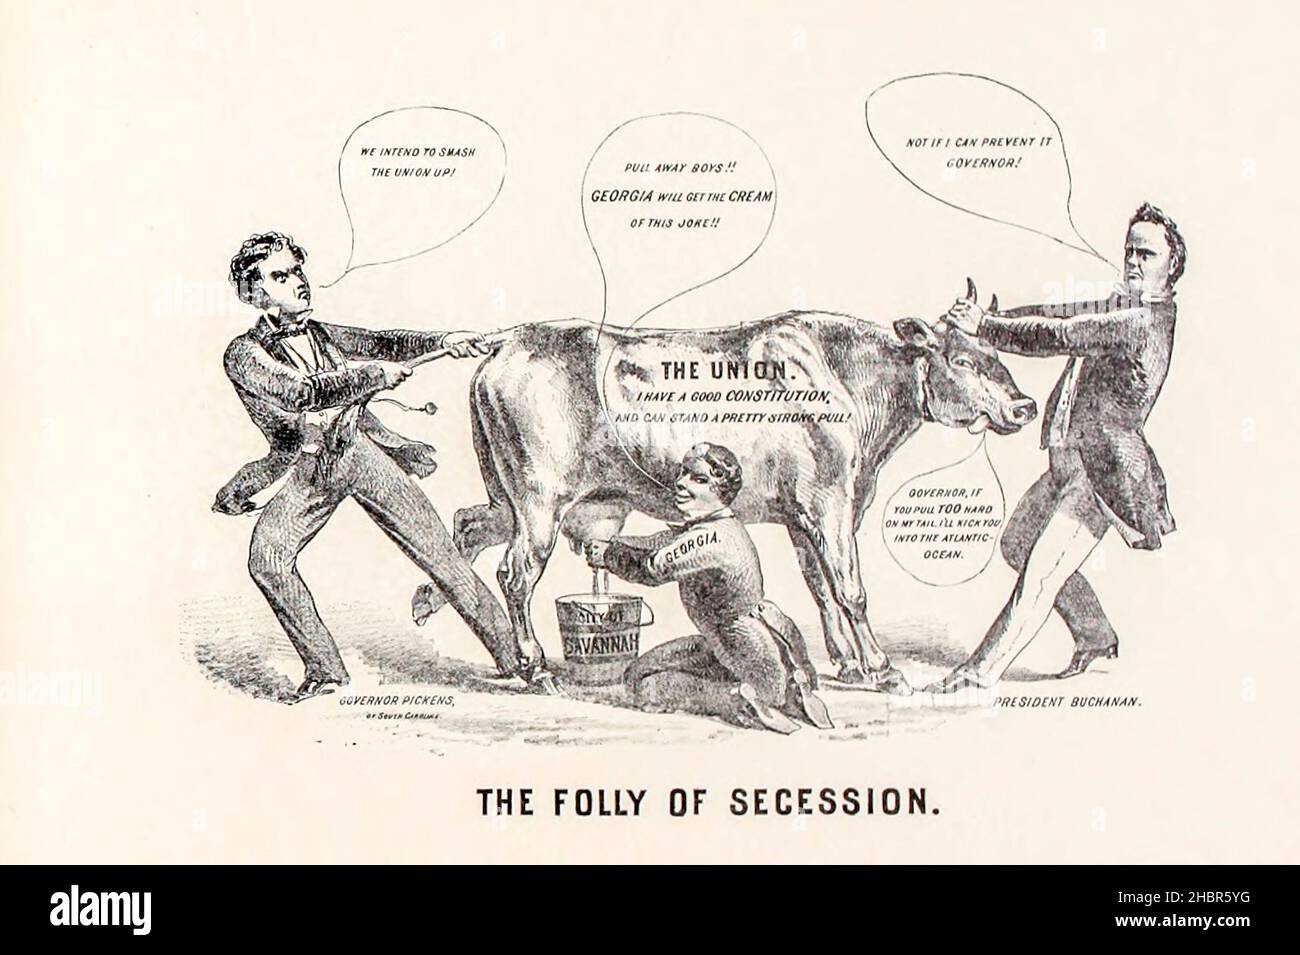 THE FOLLY OF SECESSION from a collection of Caricatures pertaining to the Civil War published in 1892 on Heavy Plate Paper Stock Photo